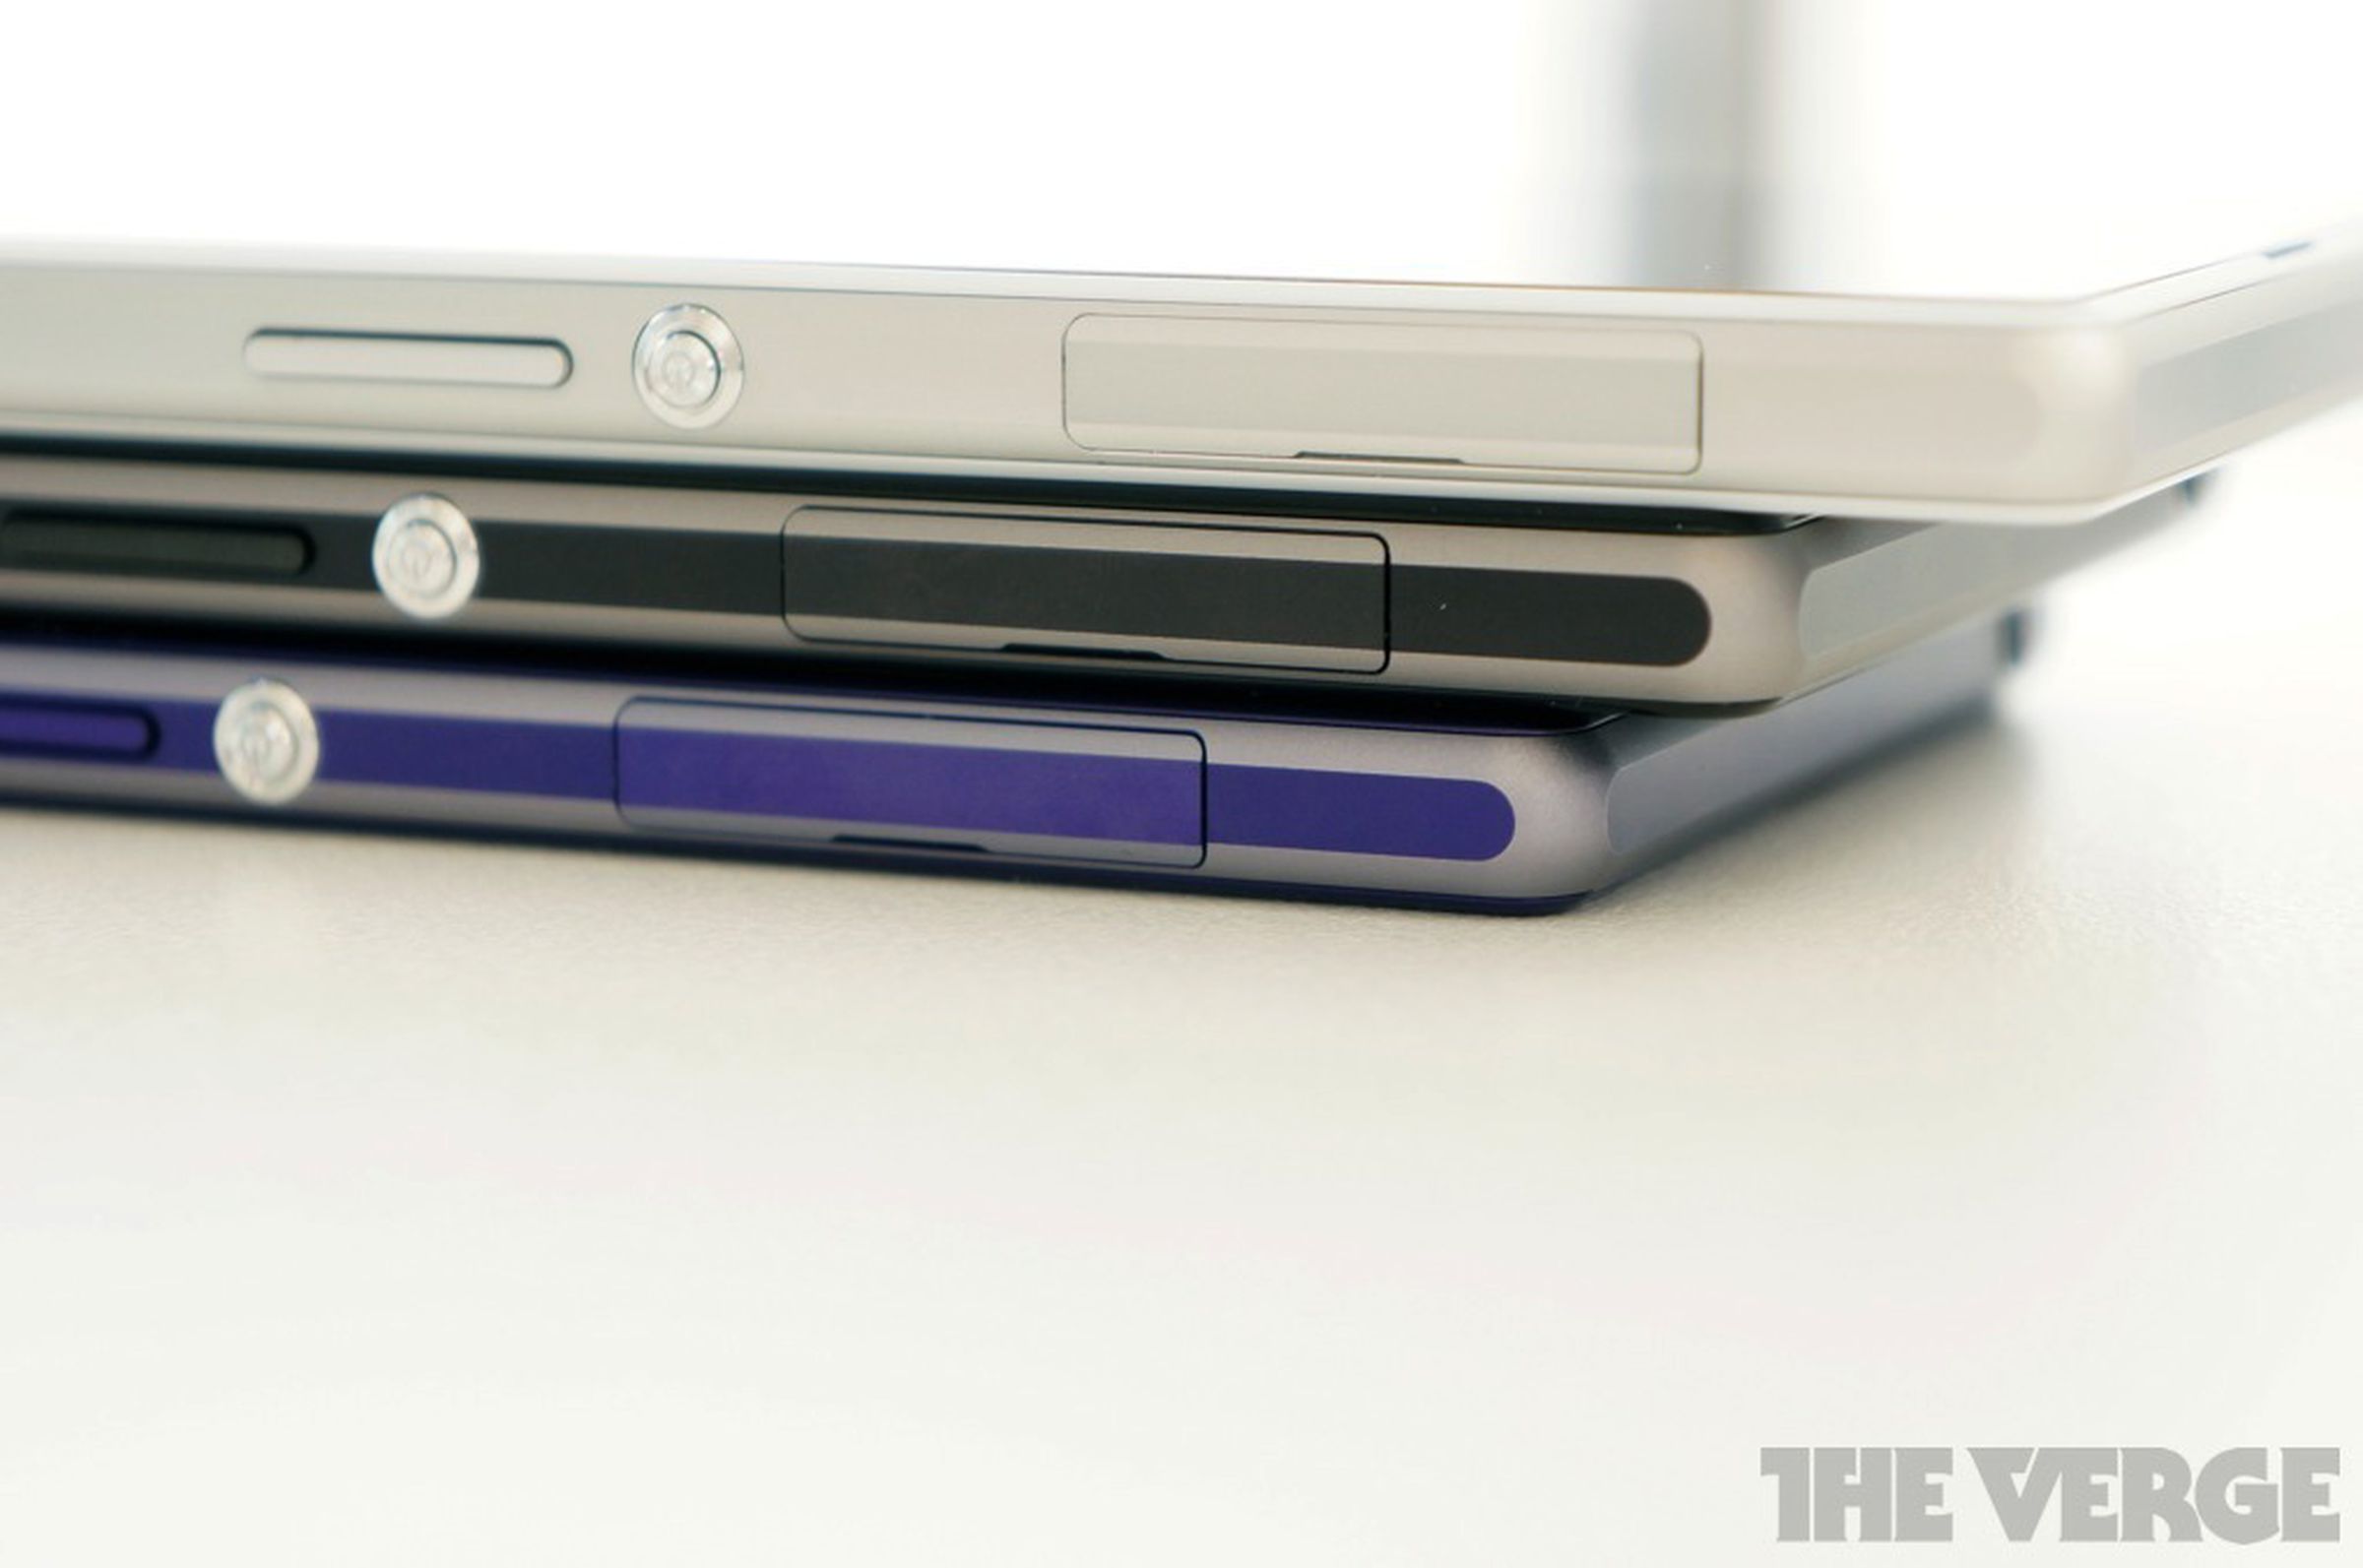 Sony Xperia Z1 hands-on gallery